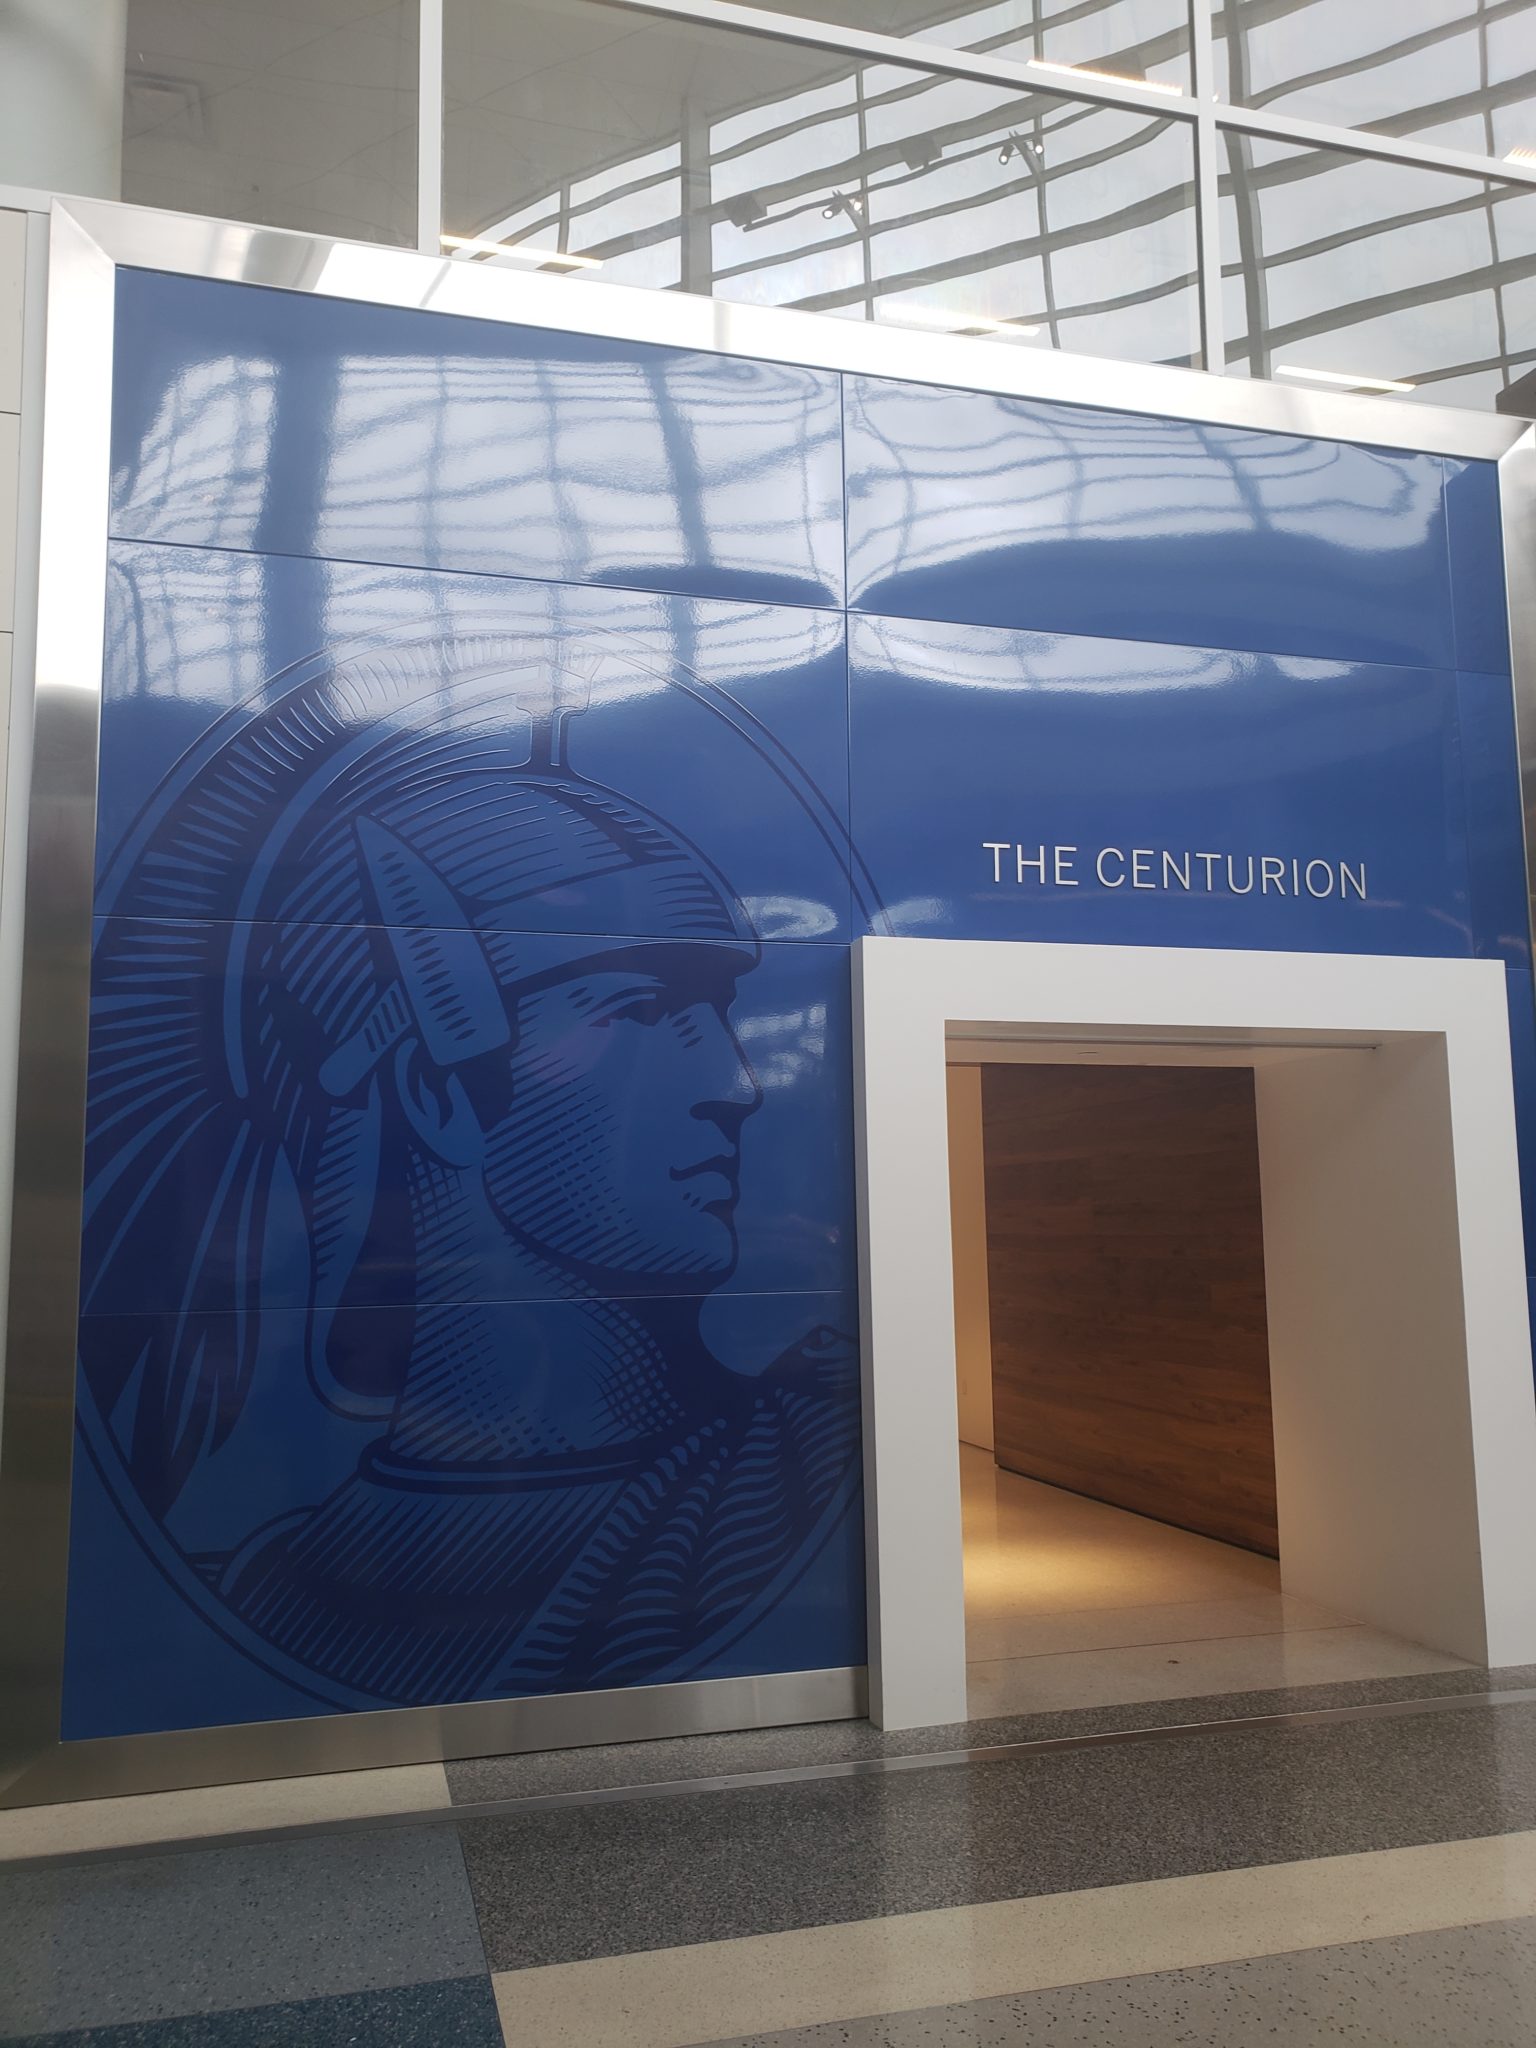 Centurion Lounge's Buzzkill Entry Policy1536 x 2048